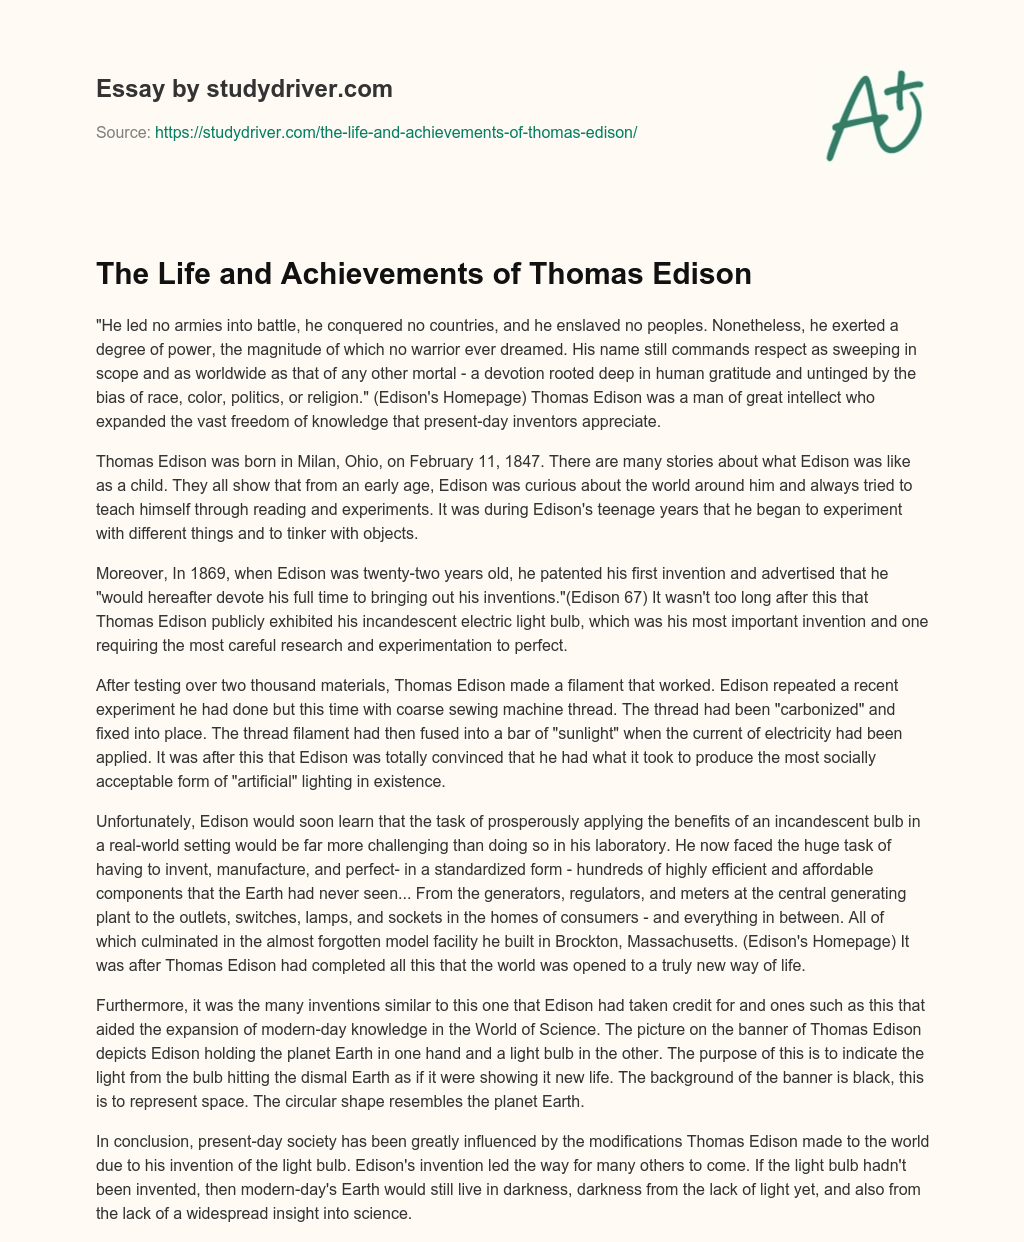 The Life and Achievements of Thomas Edison essay